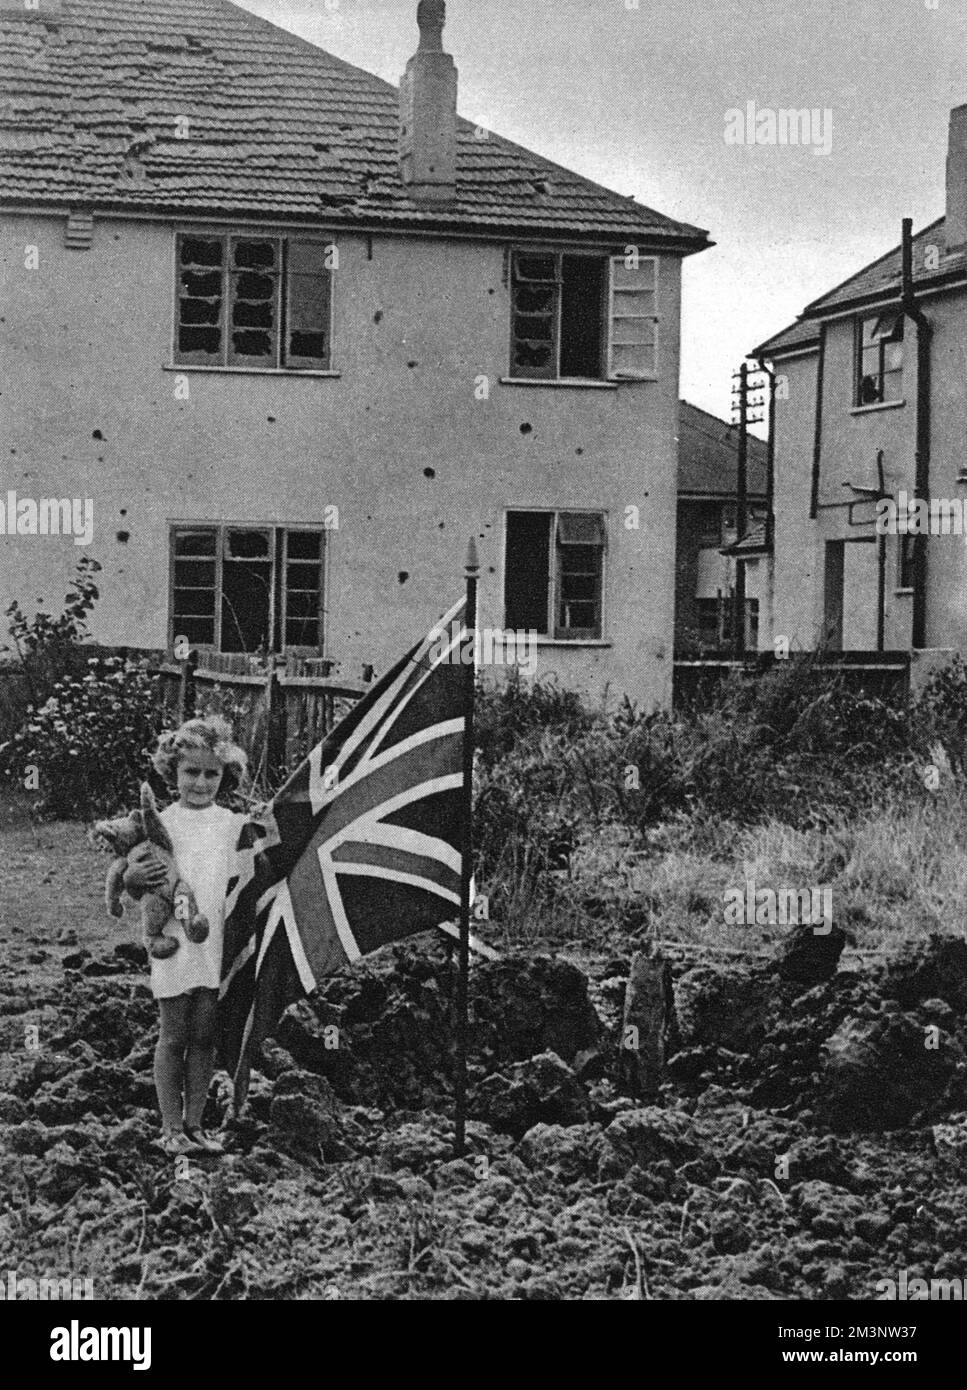 Defiant against German air raids, a little girl stands in her garden in Eastbourne, teddy bear in one hand, union jack in the other, posing by a bomb crater. Behind her is a house with smashed windows and missing slates: testimony to the violence of the explosion.     Date: 1940 Stock Photo